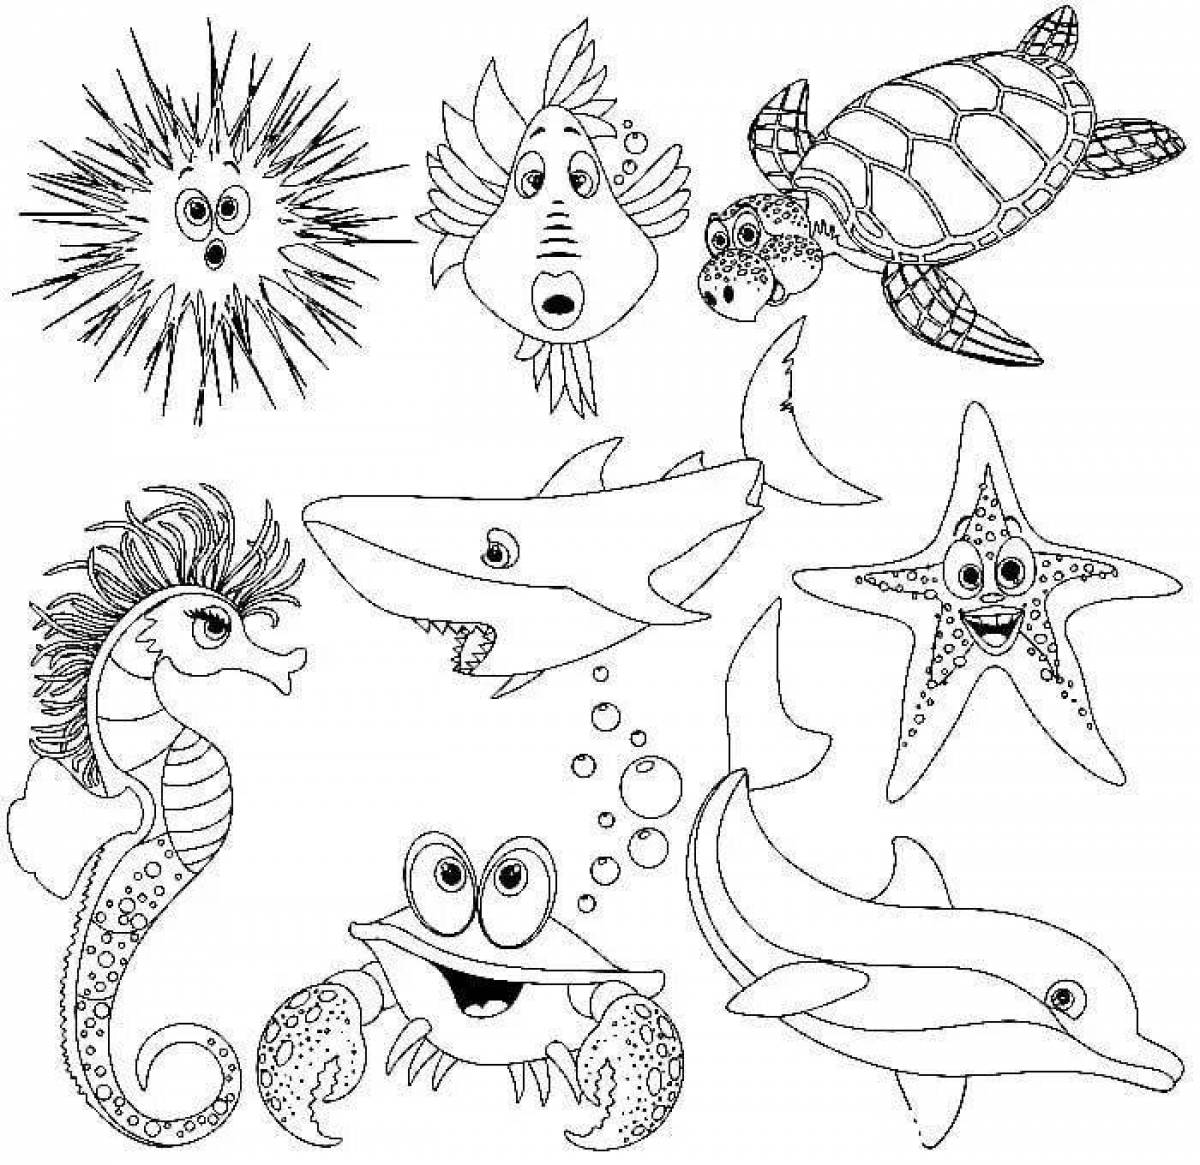 Marvelous sea life coloring pages